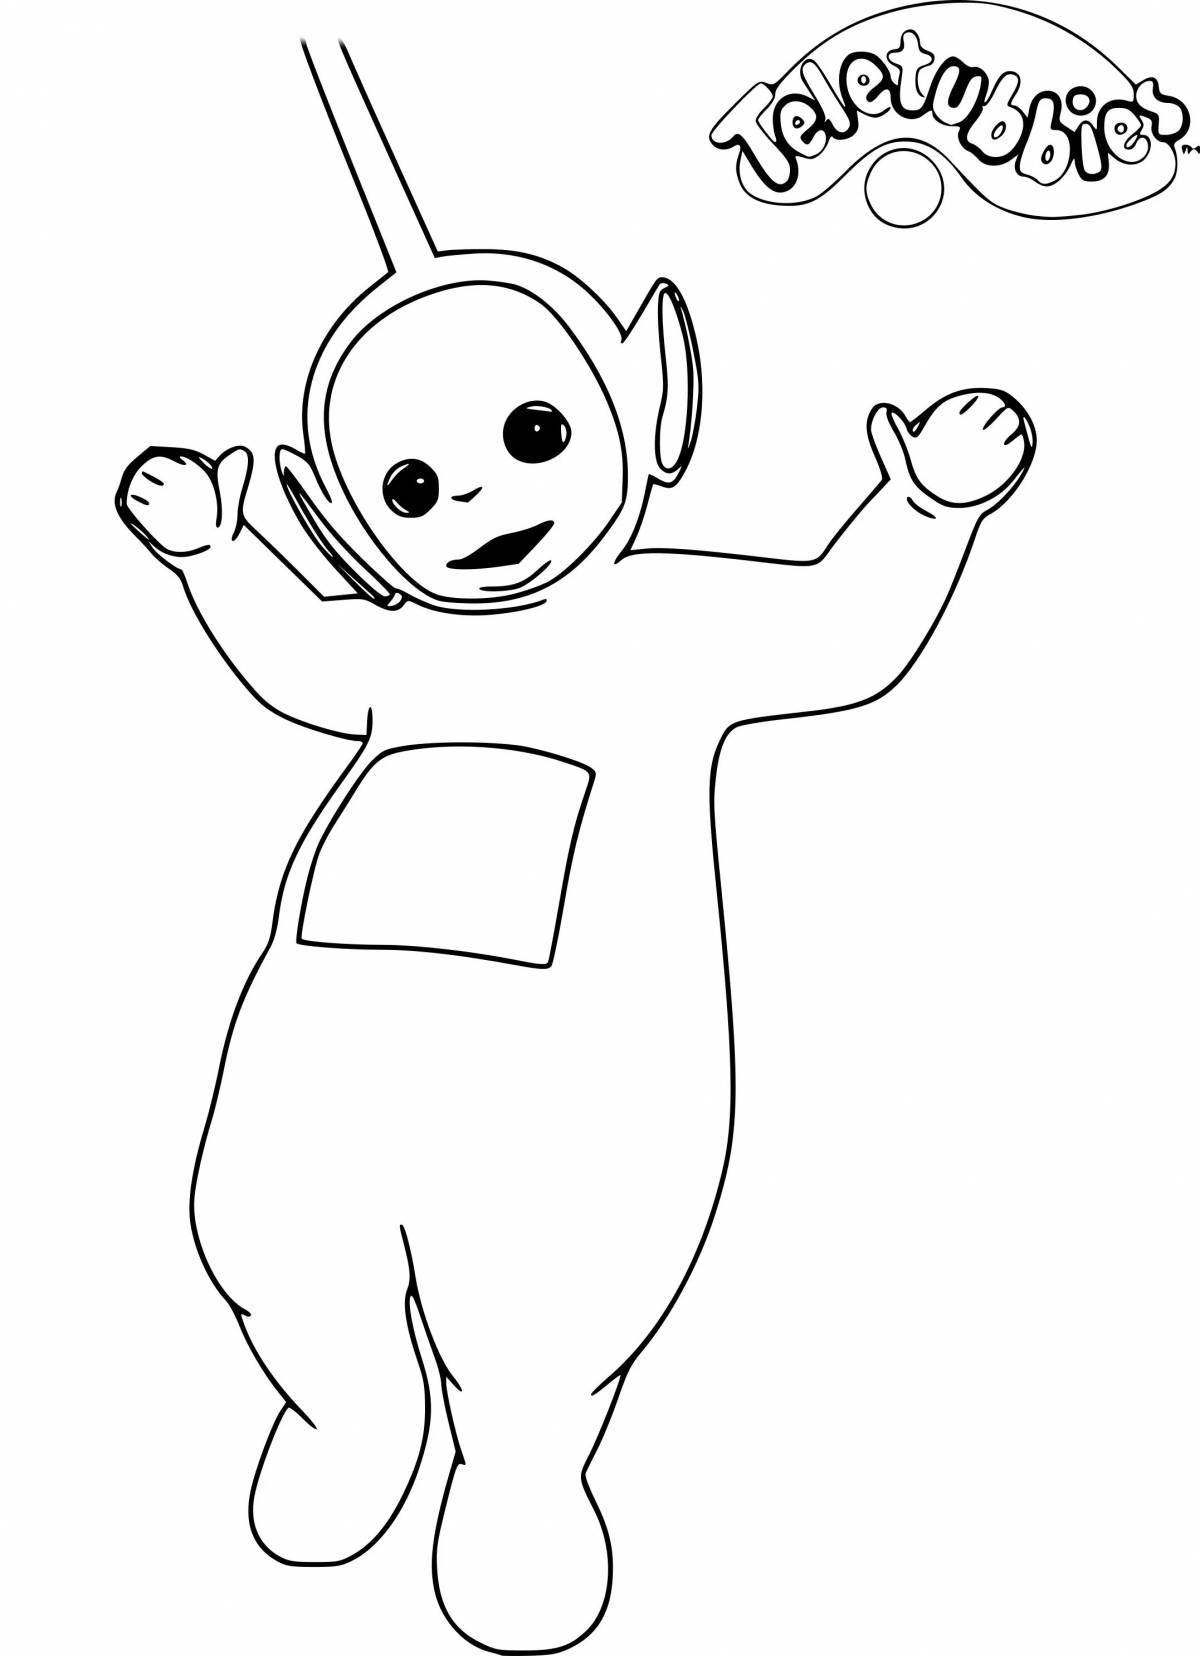 Playful slender-tubbies coloring page